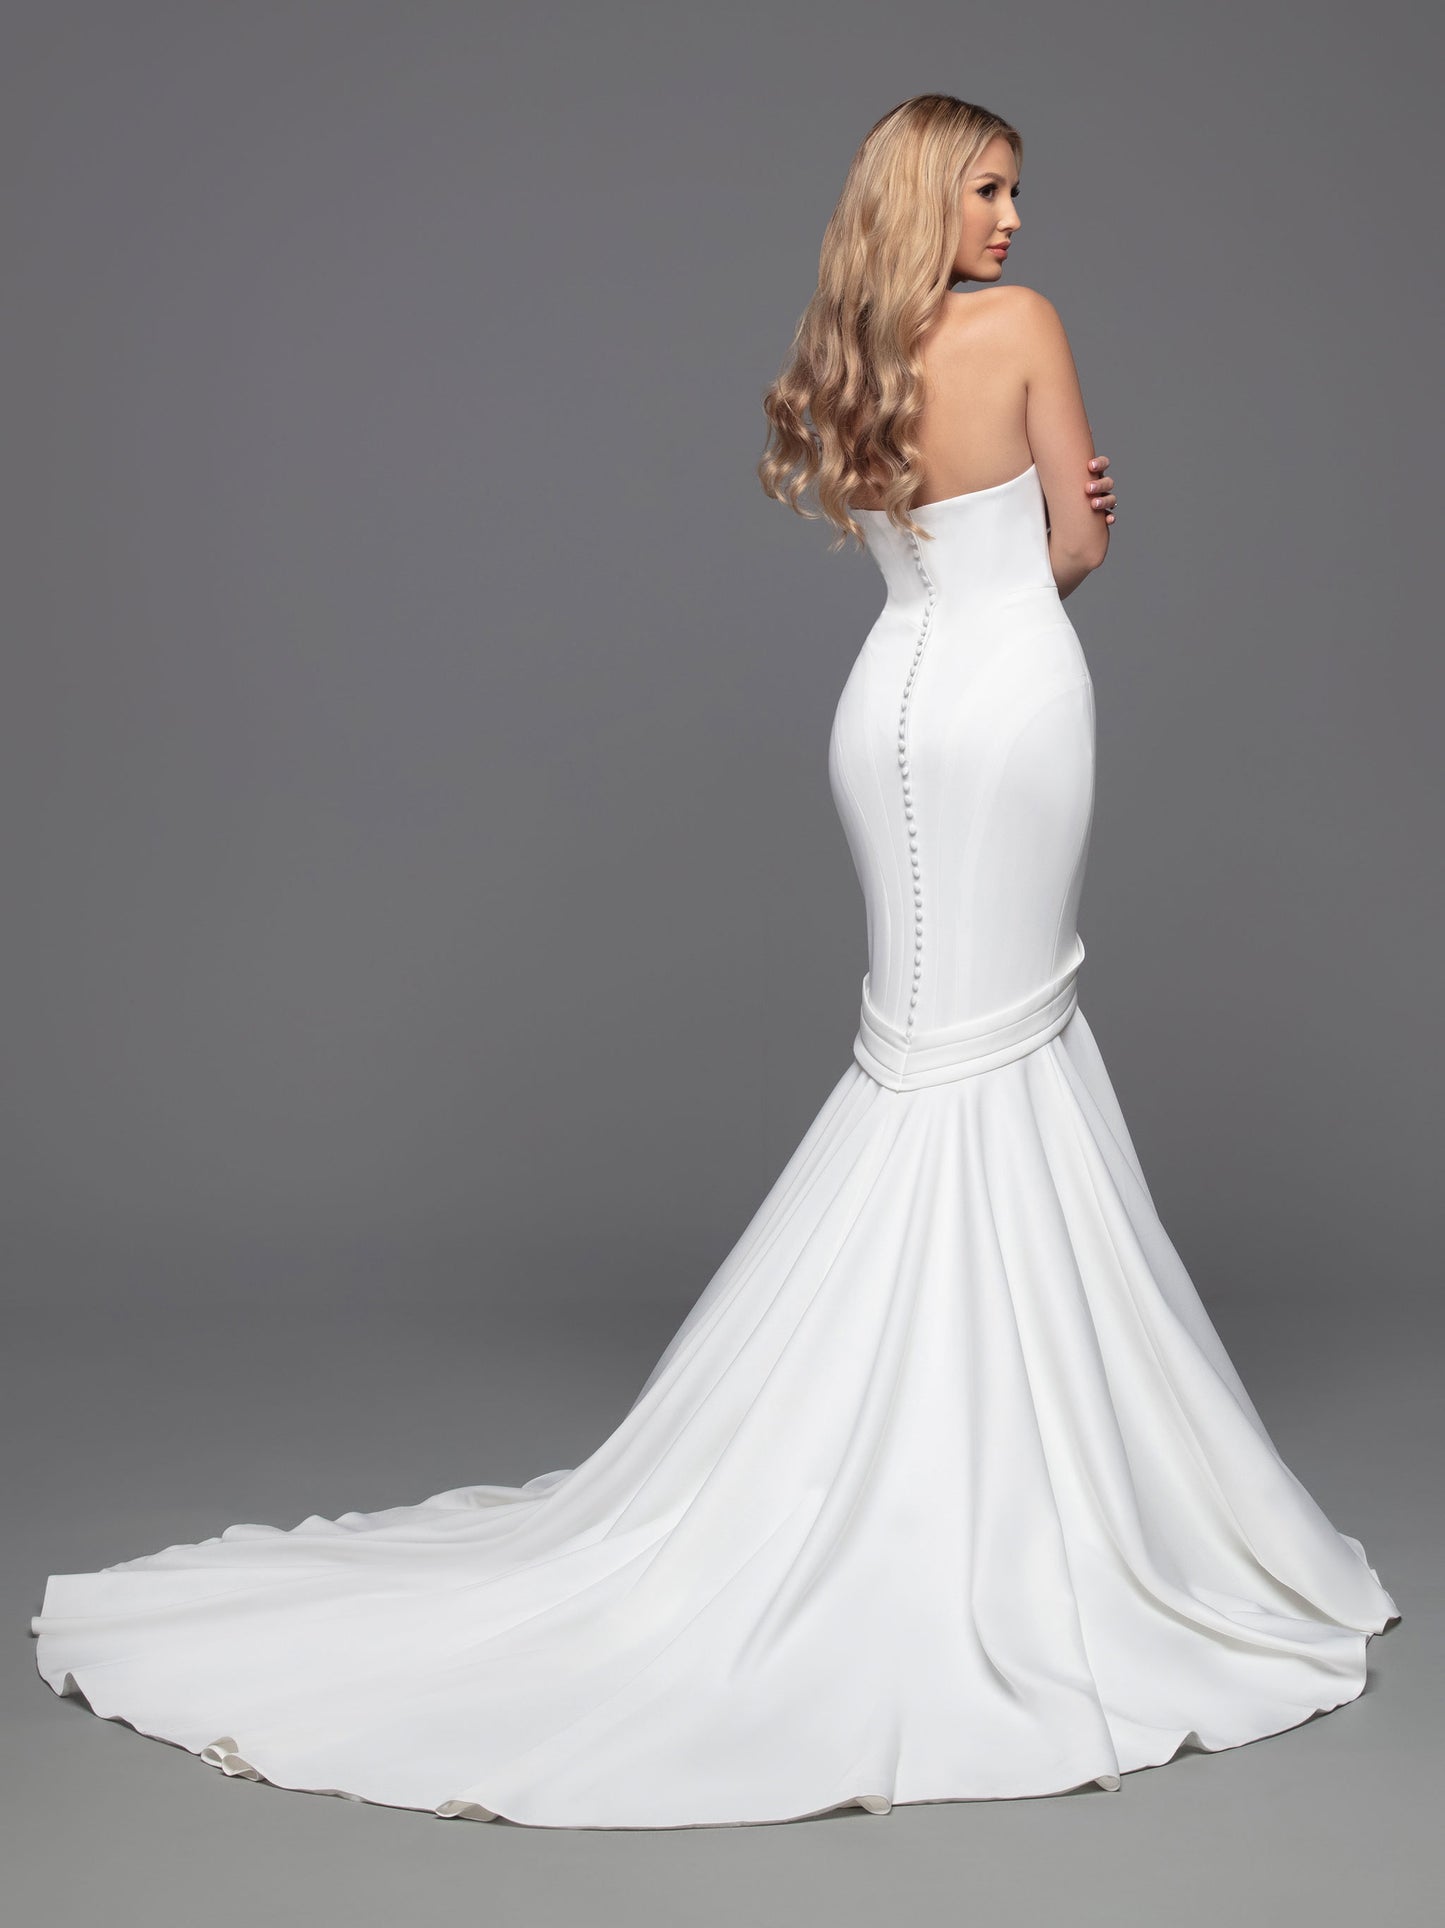 Experience an unforgettable wedding day with this luxurious bridal gown from Davinci. Crafted from alluring ivory fabric, this fit-and-flare mermaid gown is perfected with a strapless, straight-across neckline, a modest silhouette, and an open back with interesting button details and a zipper fastening. The chapel train adds a truly elegant touch.